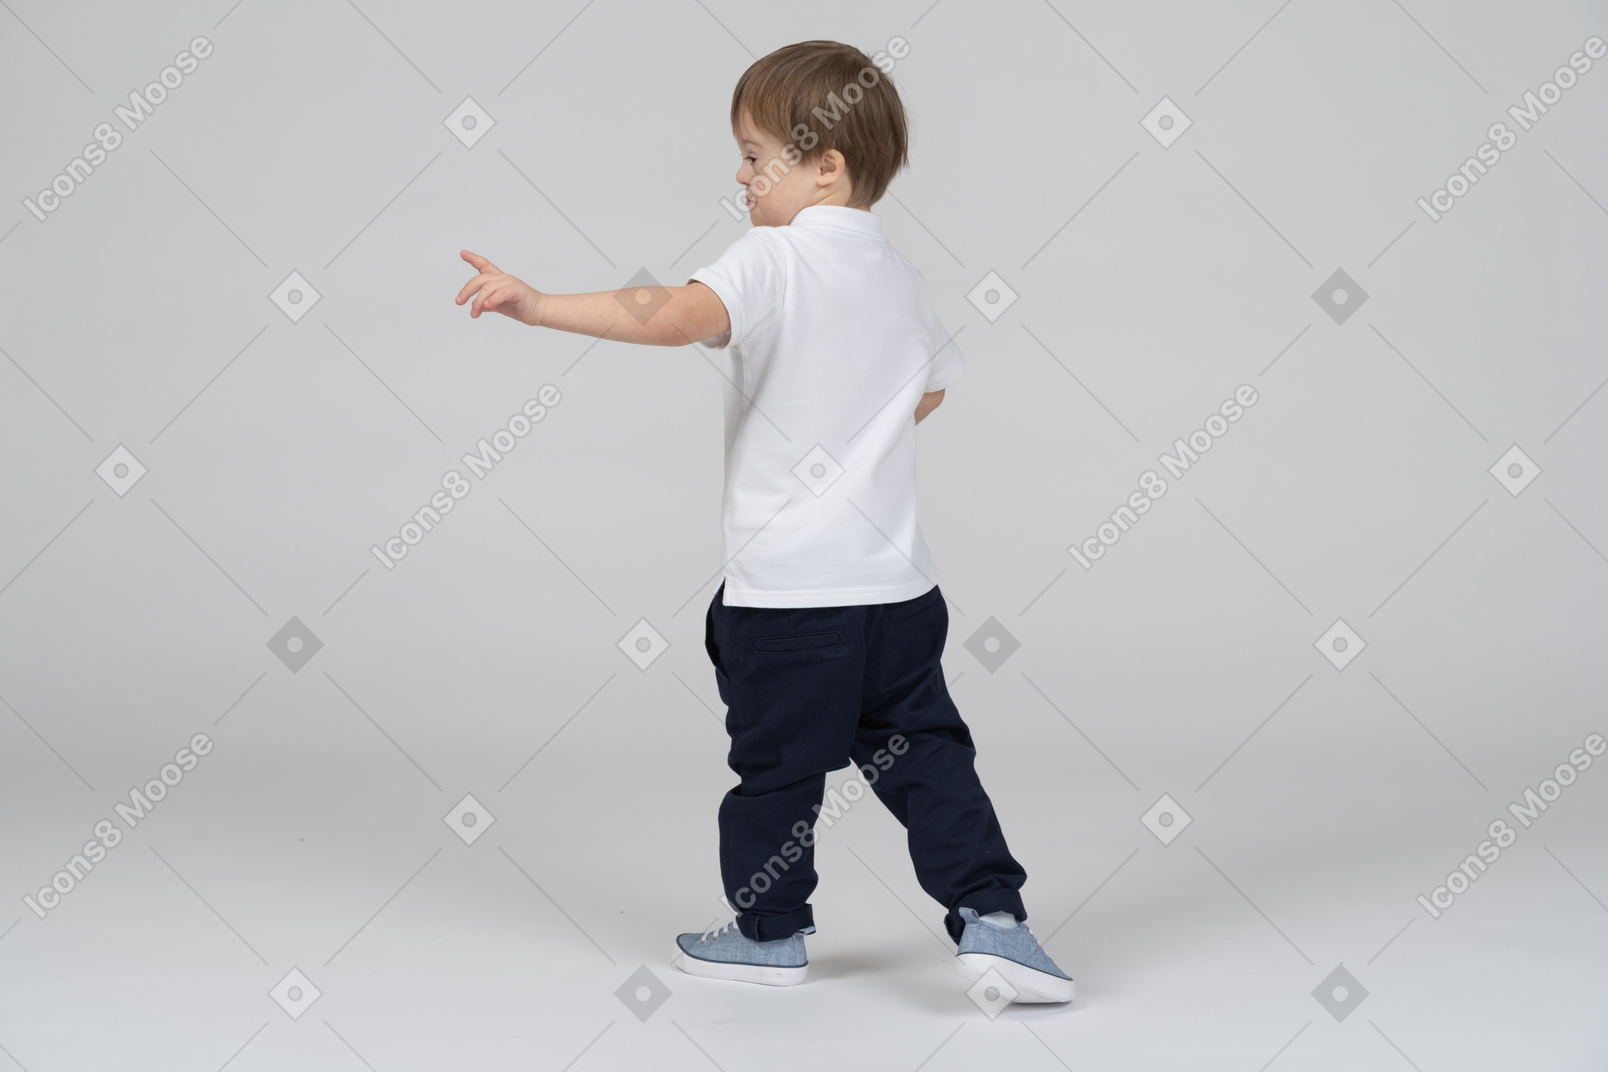 Little boy turning to point left